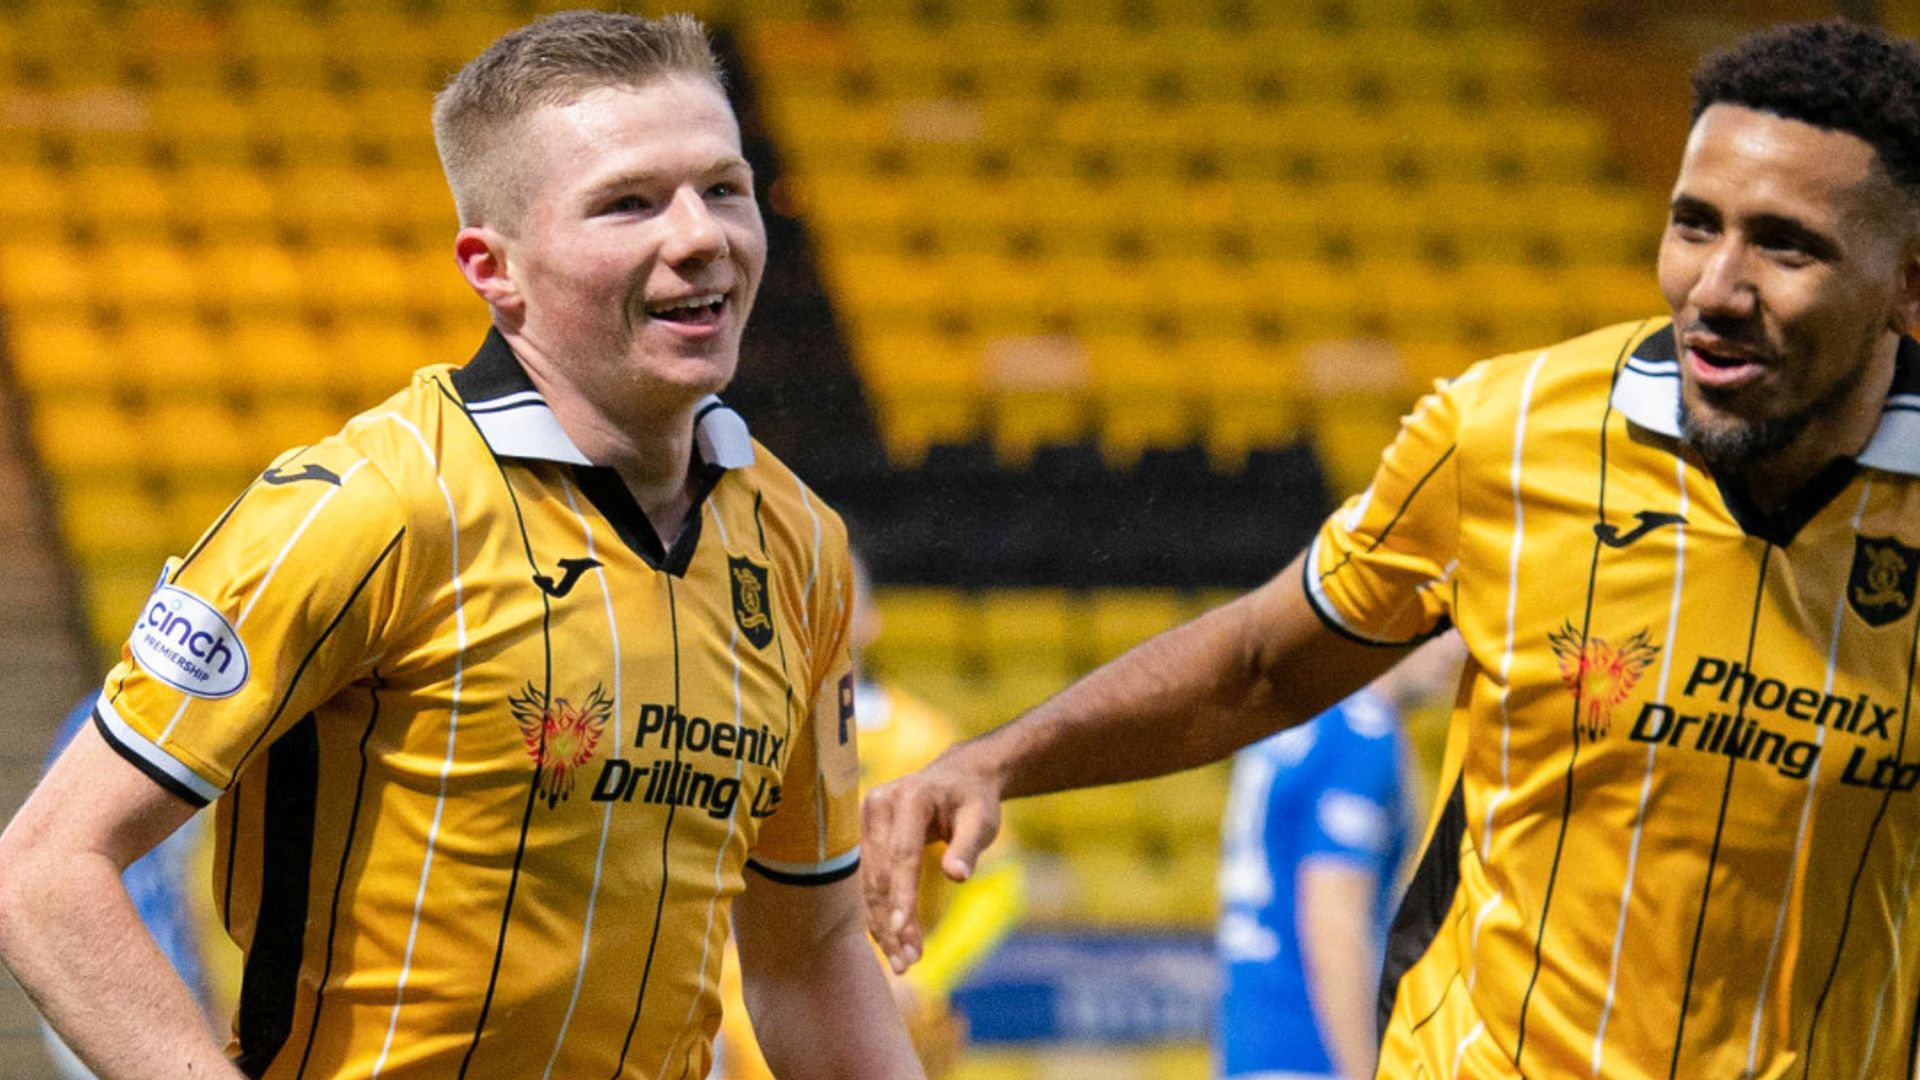 Livingston cruise to win over Kilmarnock and go fourth